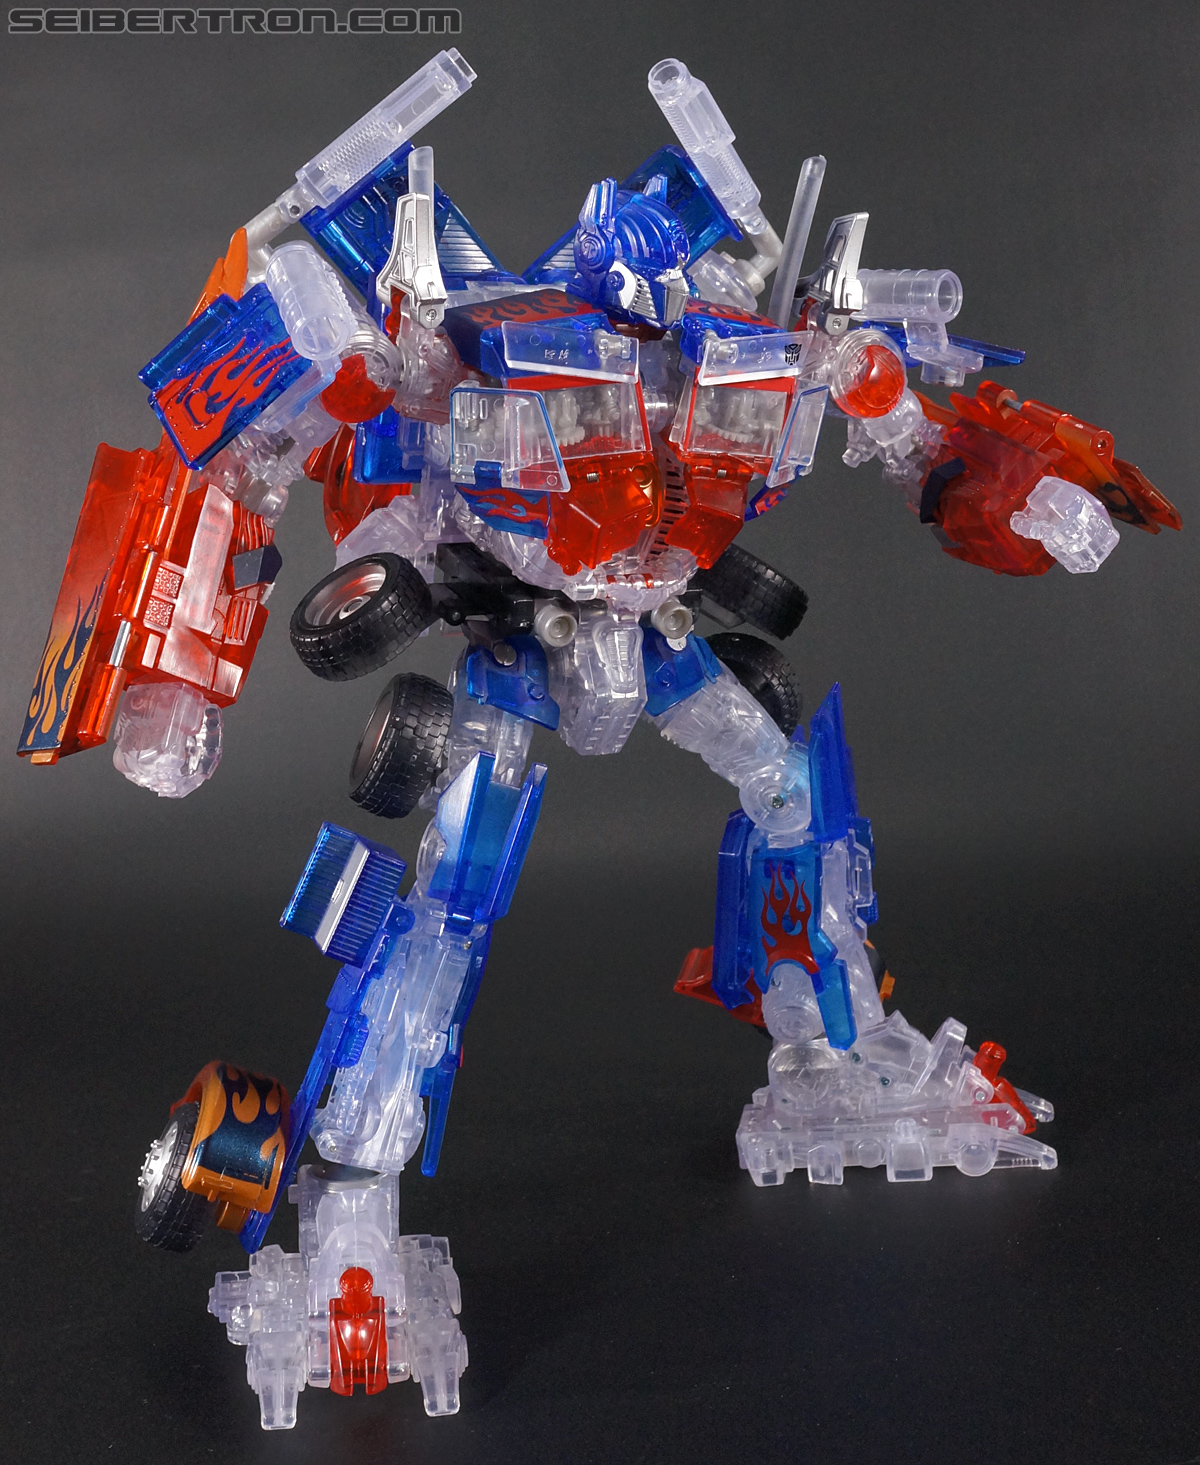 Transformers Revenge of the Fallen Optimus Prime Limited Clear Color Edition (Image #68 of 125)